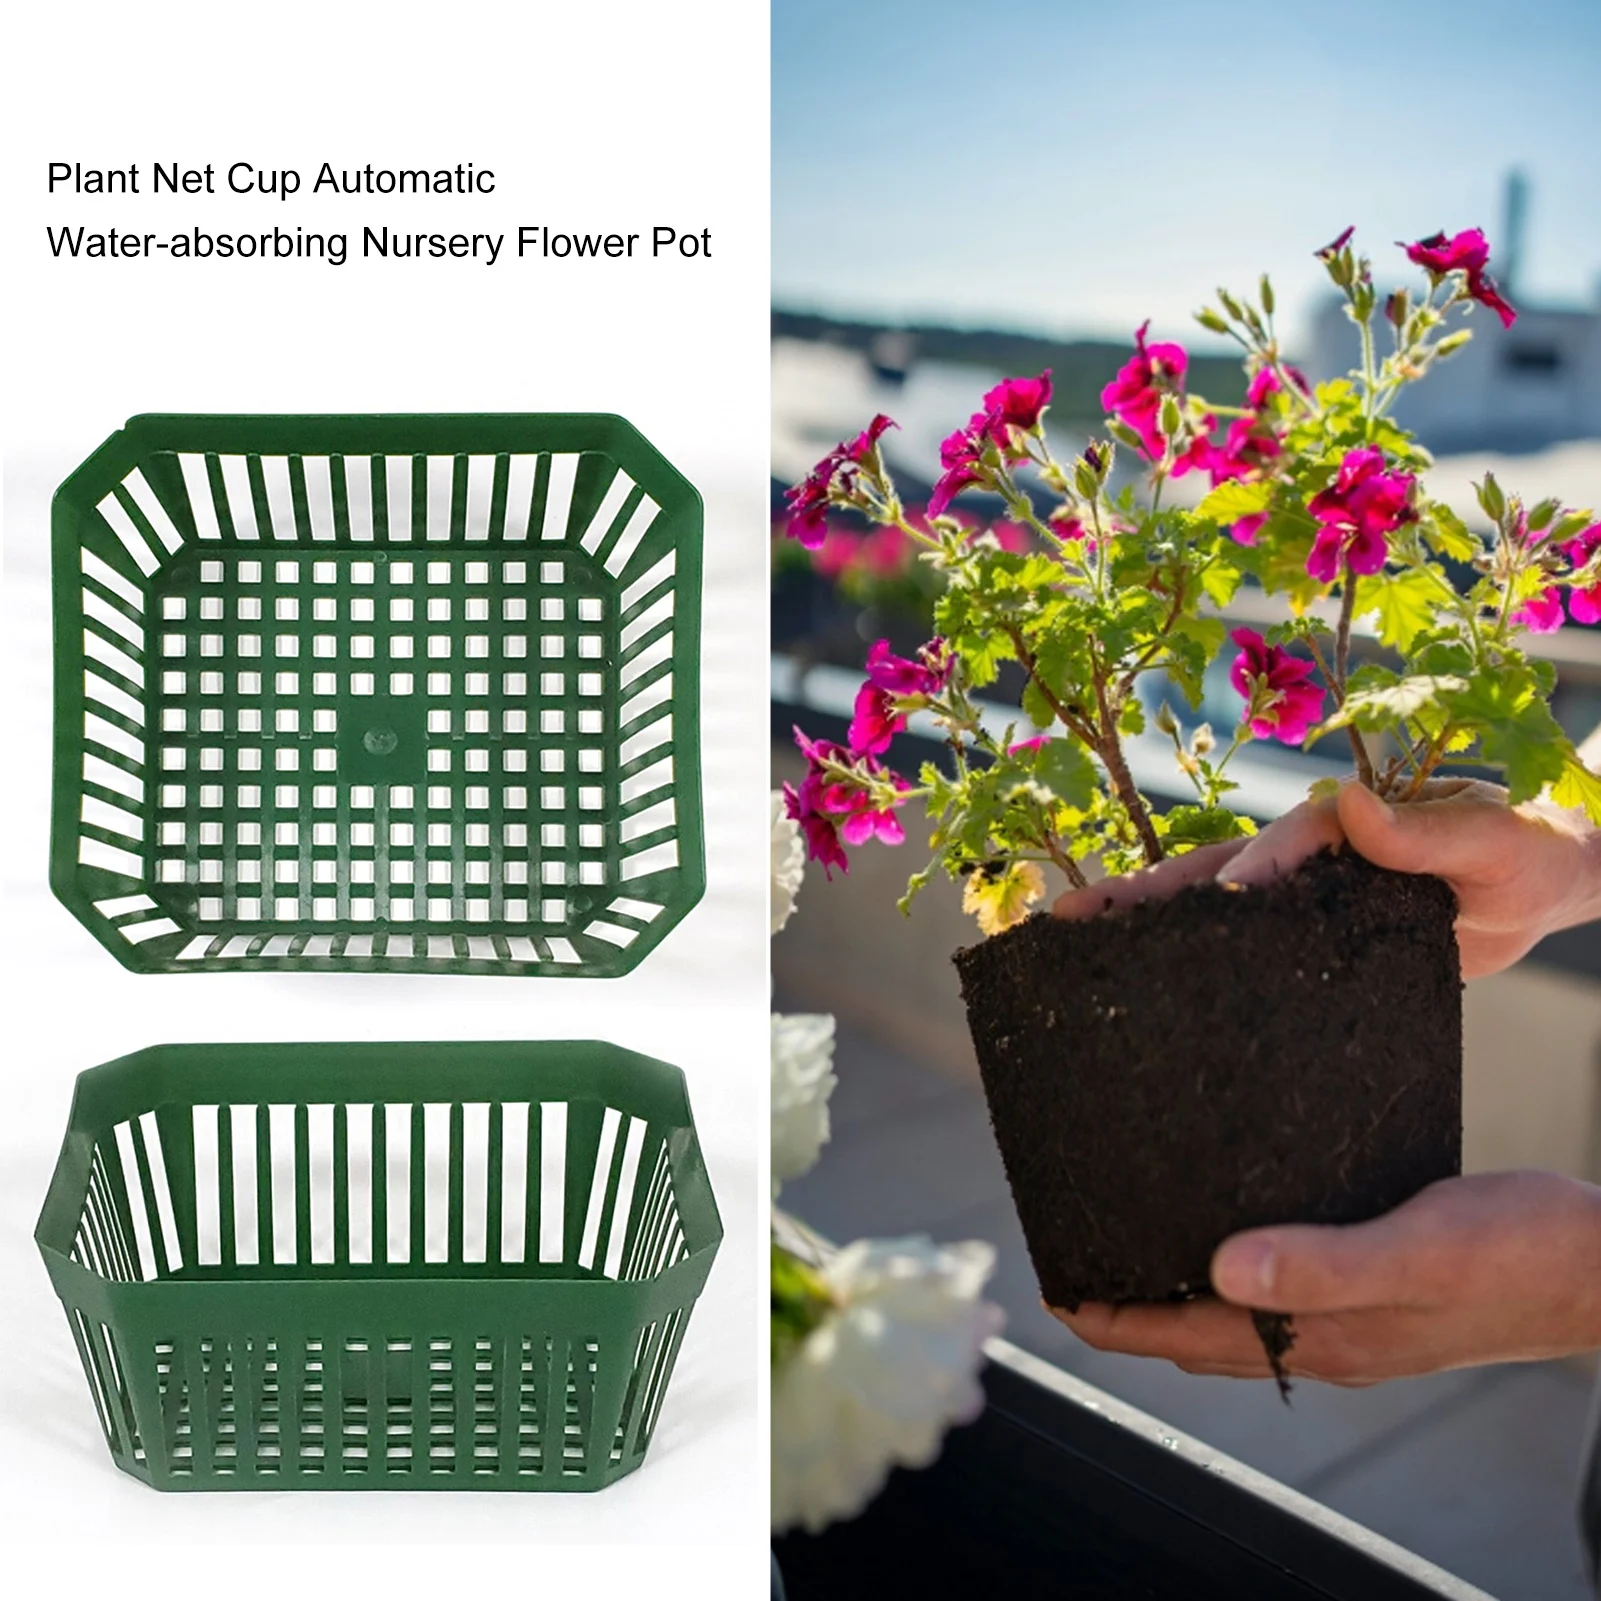 

5PCS Soilless Culture Cup Hydroponic Liner Nursery Flower Pot Sprouting Grower Baskets Plant Aquatic Plant Nursery Net Cup